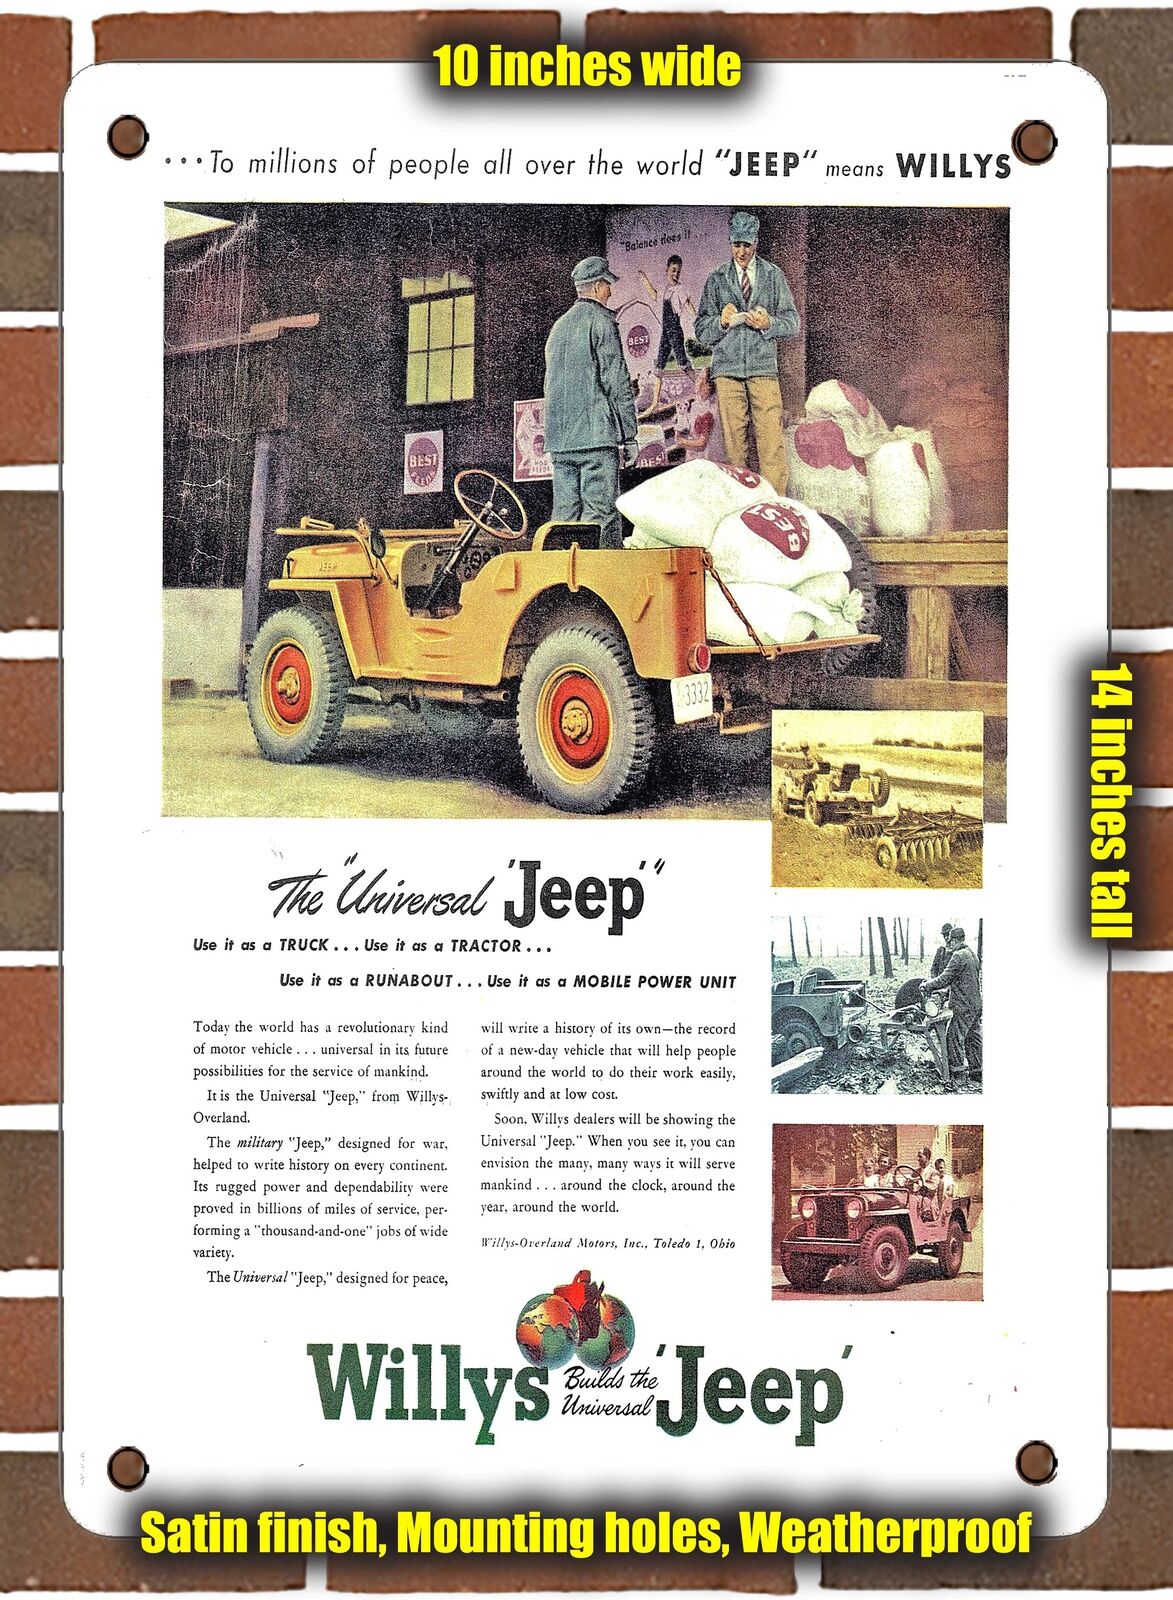 METAL SIGN - 1945 Willys Universal Jeeps: Versatile for various uses. - 10x14\